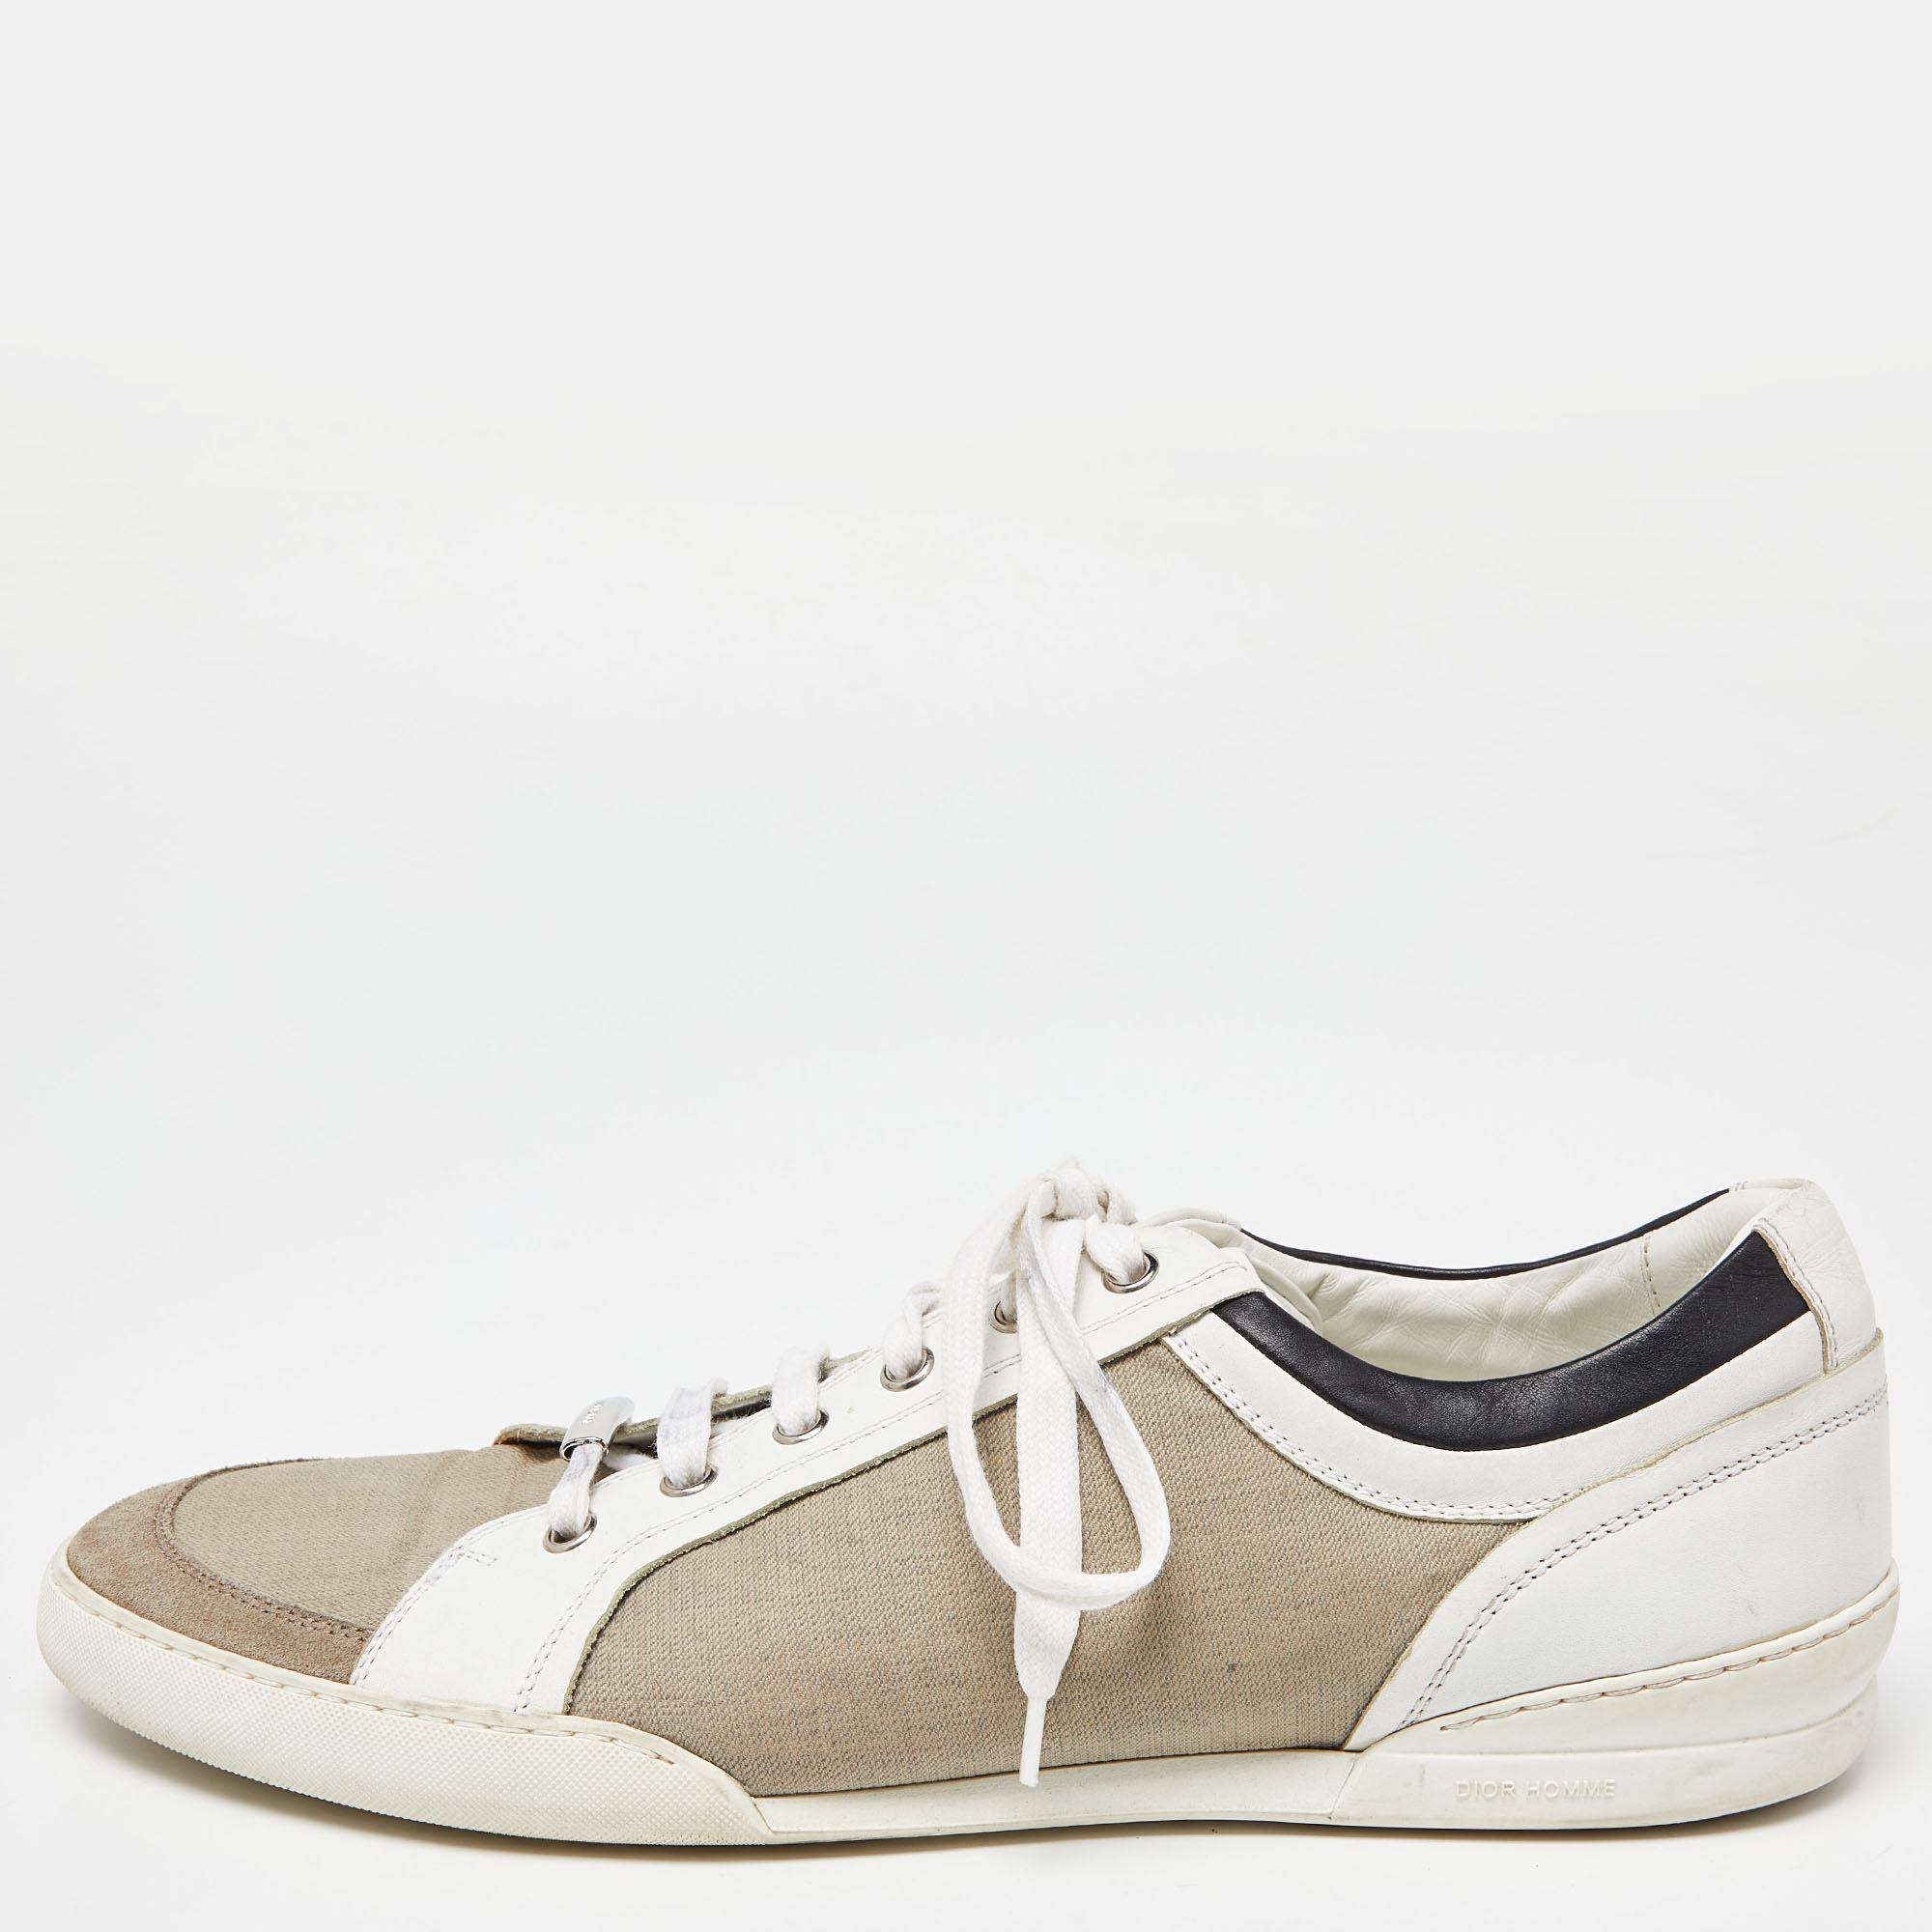 Dior Homme White/Beige Leather And Canvas Low Top Sneakers Size 43.5